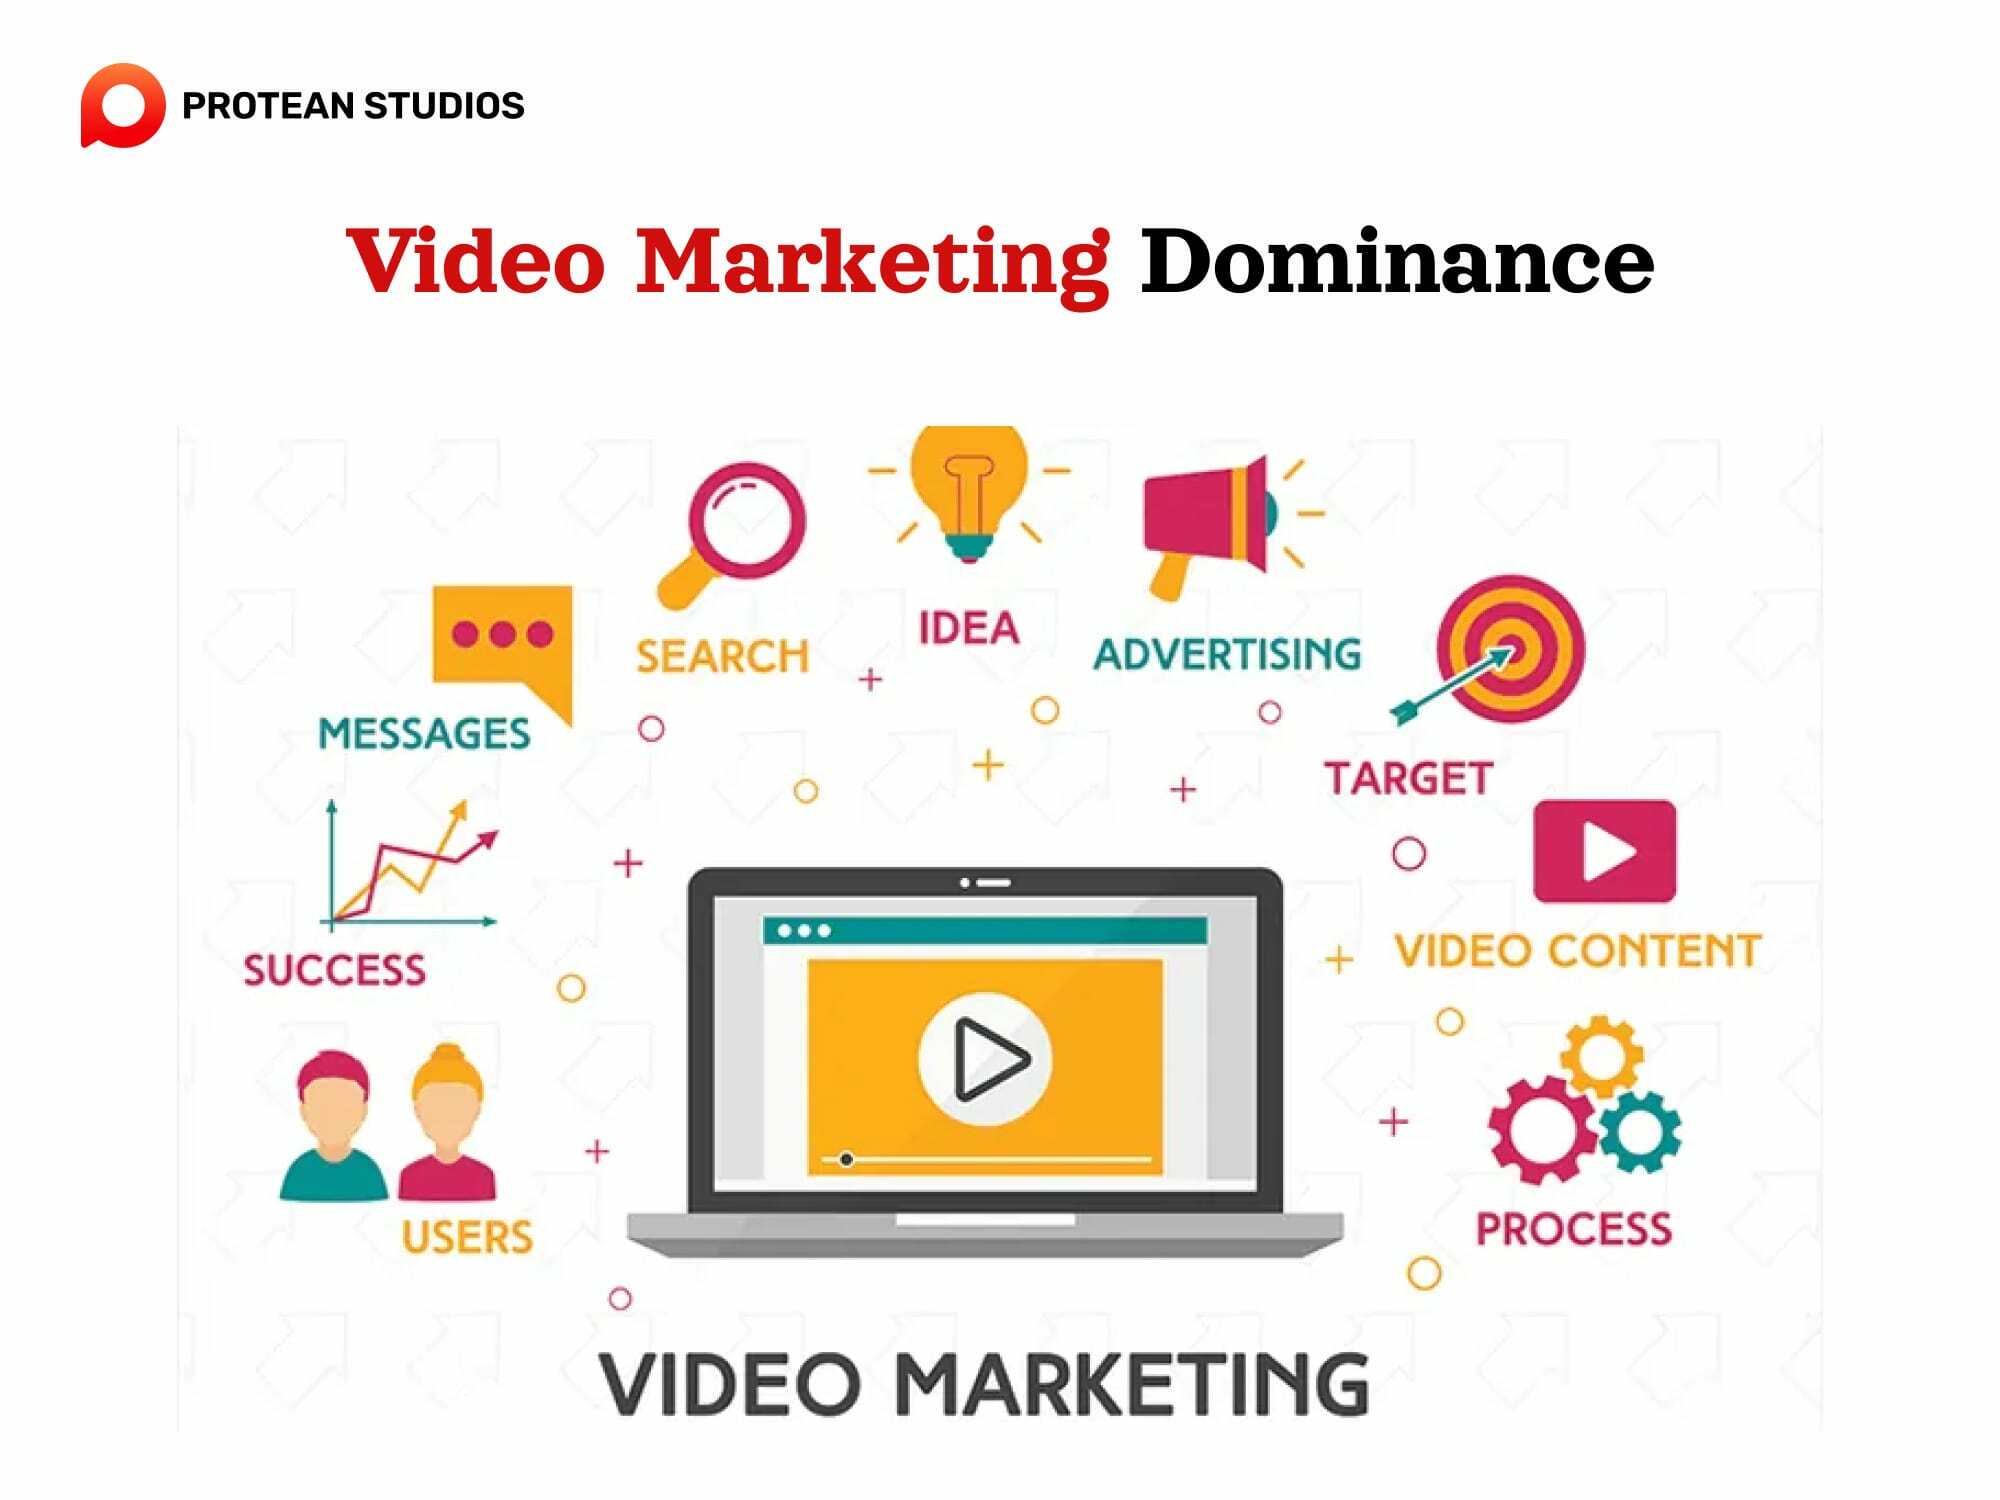 Marketers should use video marketing